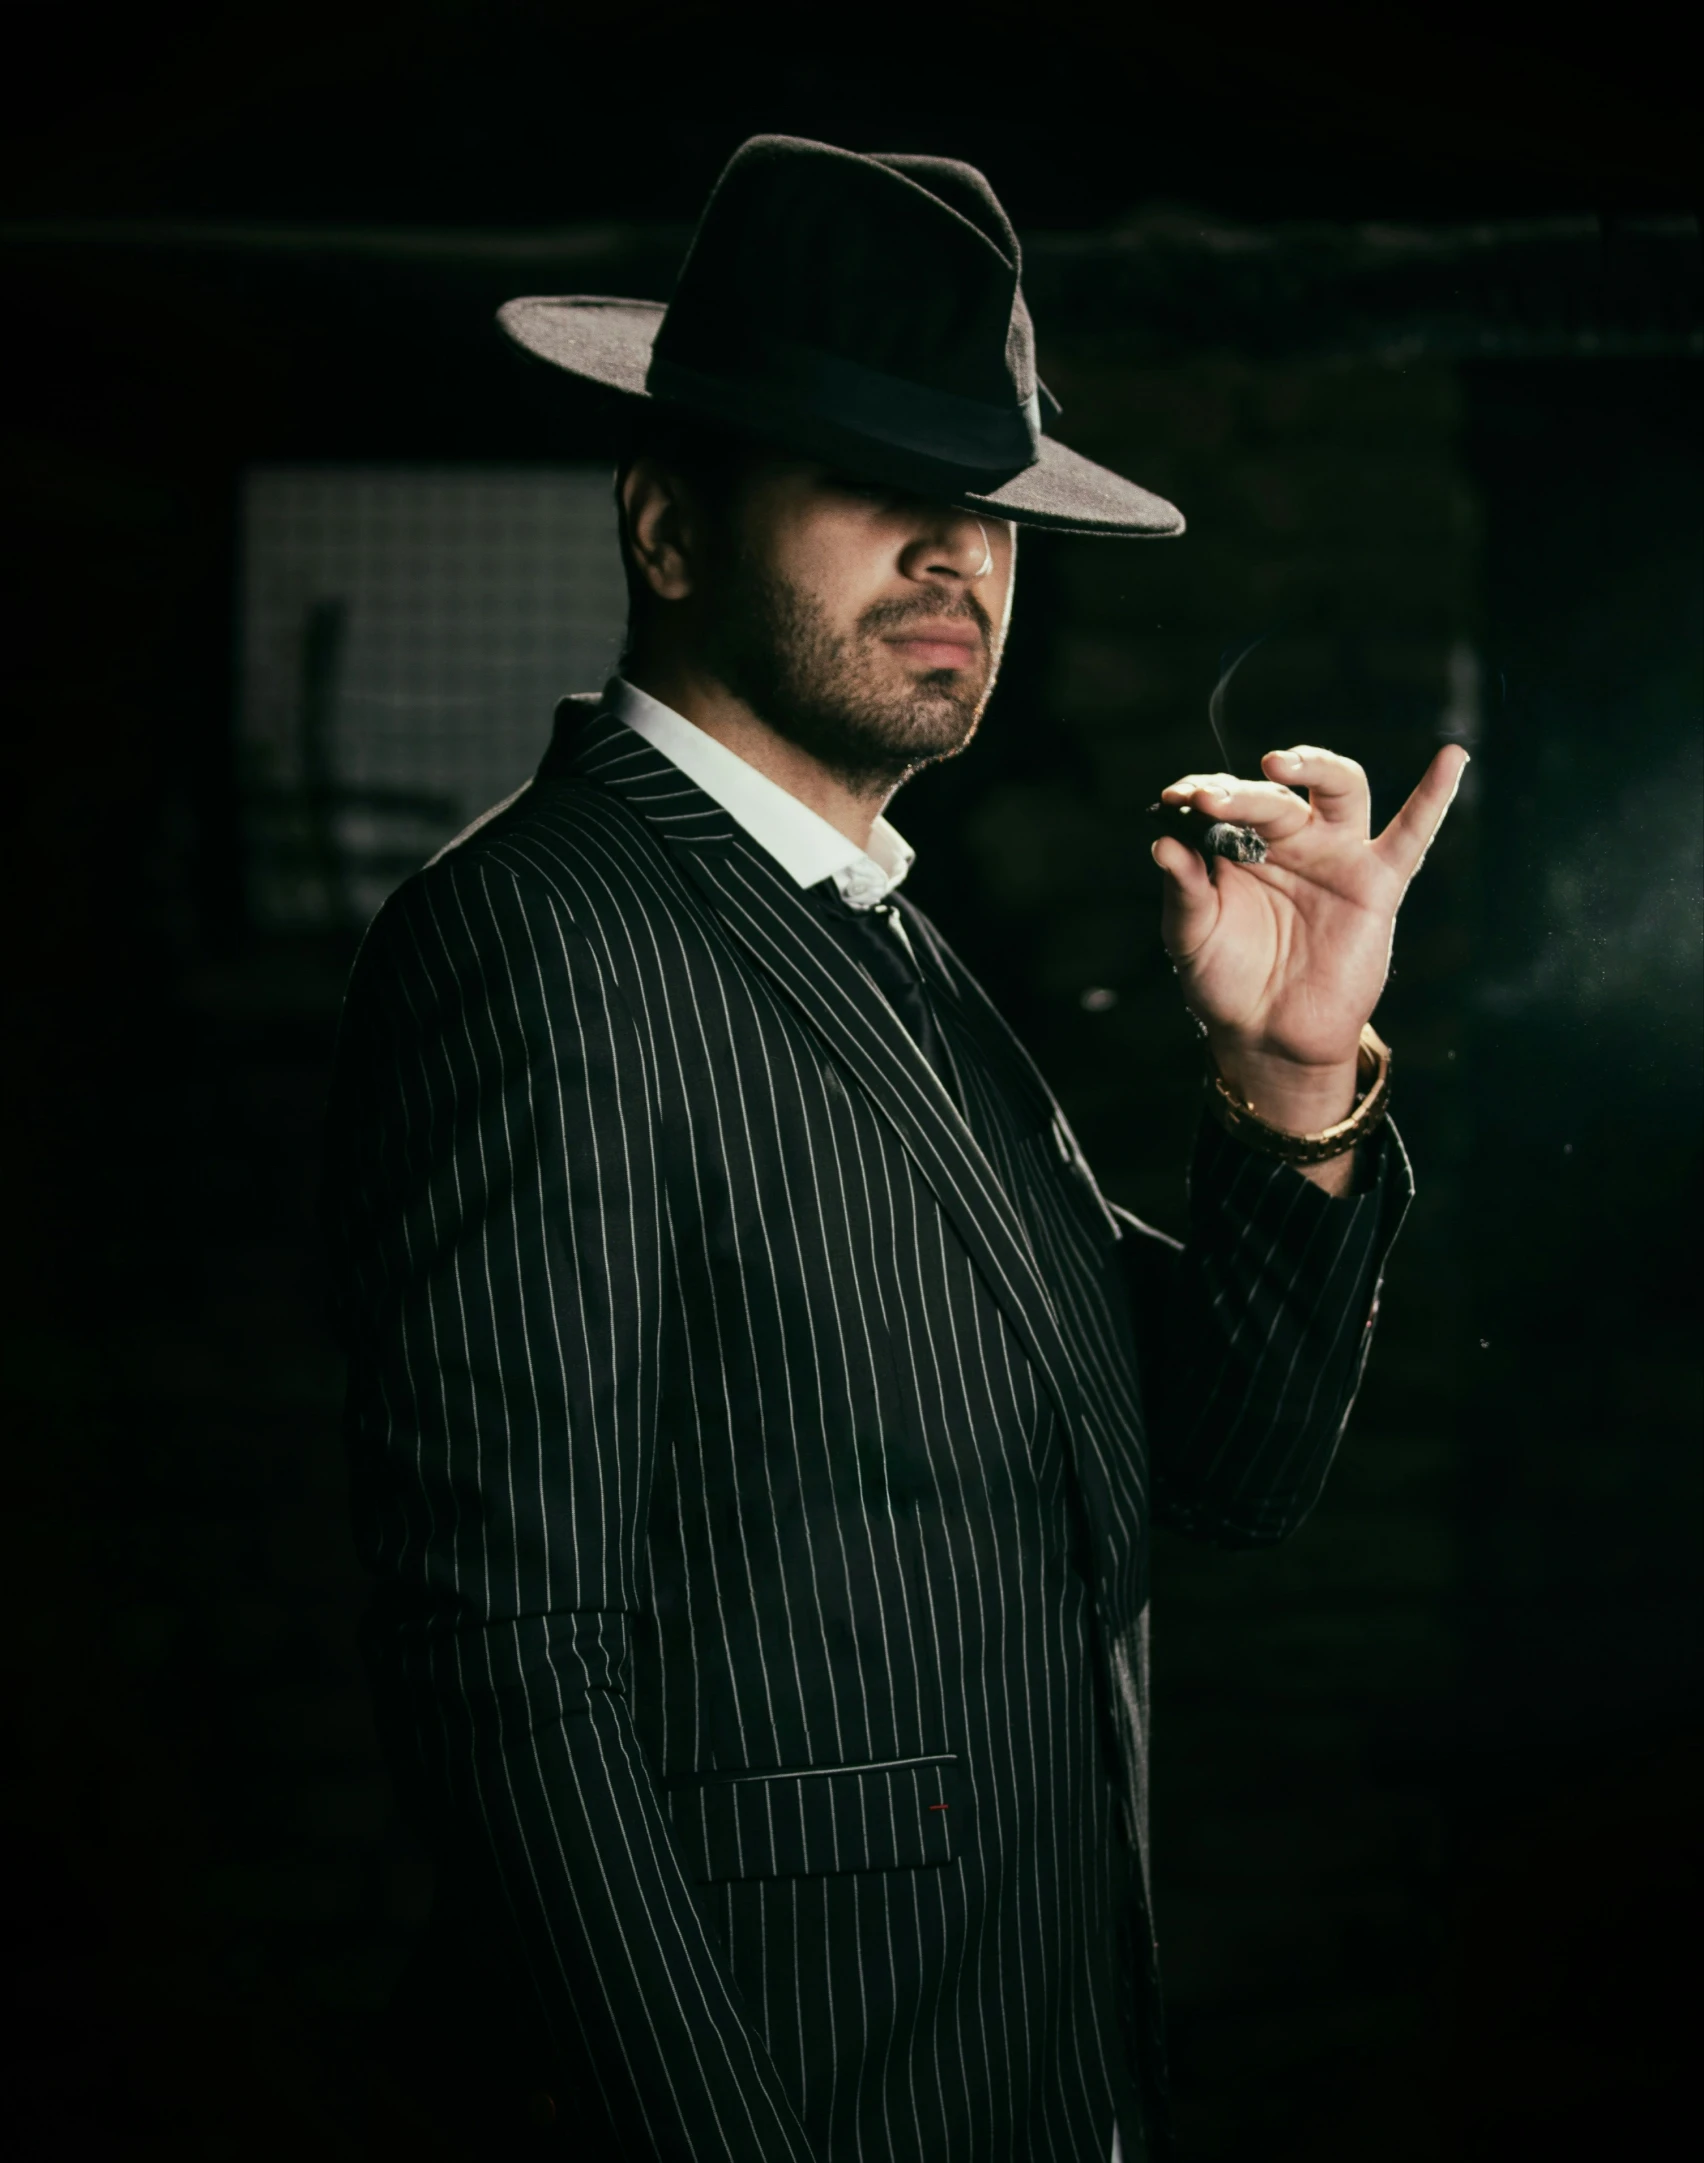 a man in a pinstripe suit and hat holding a cigarette